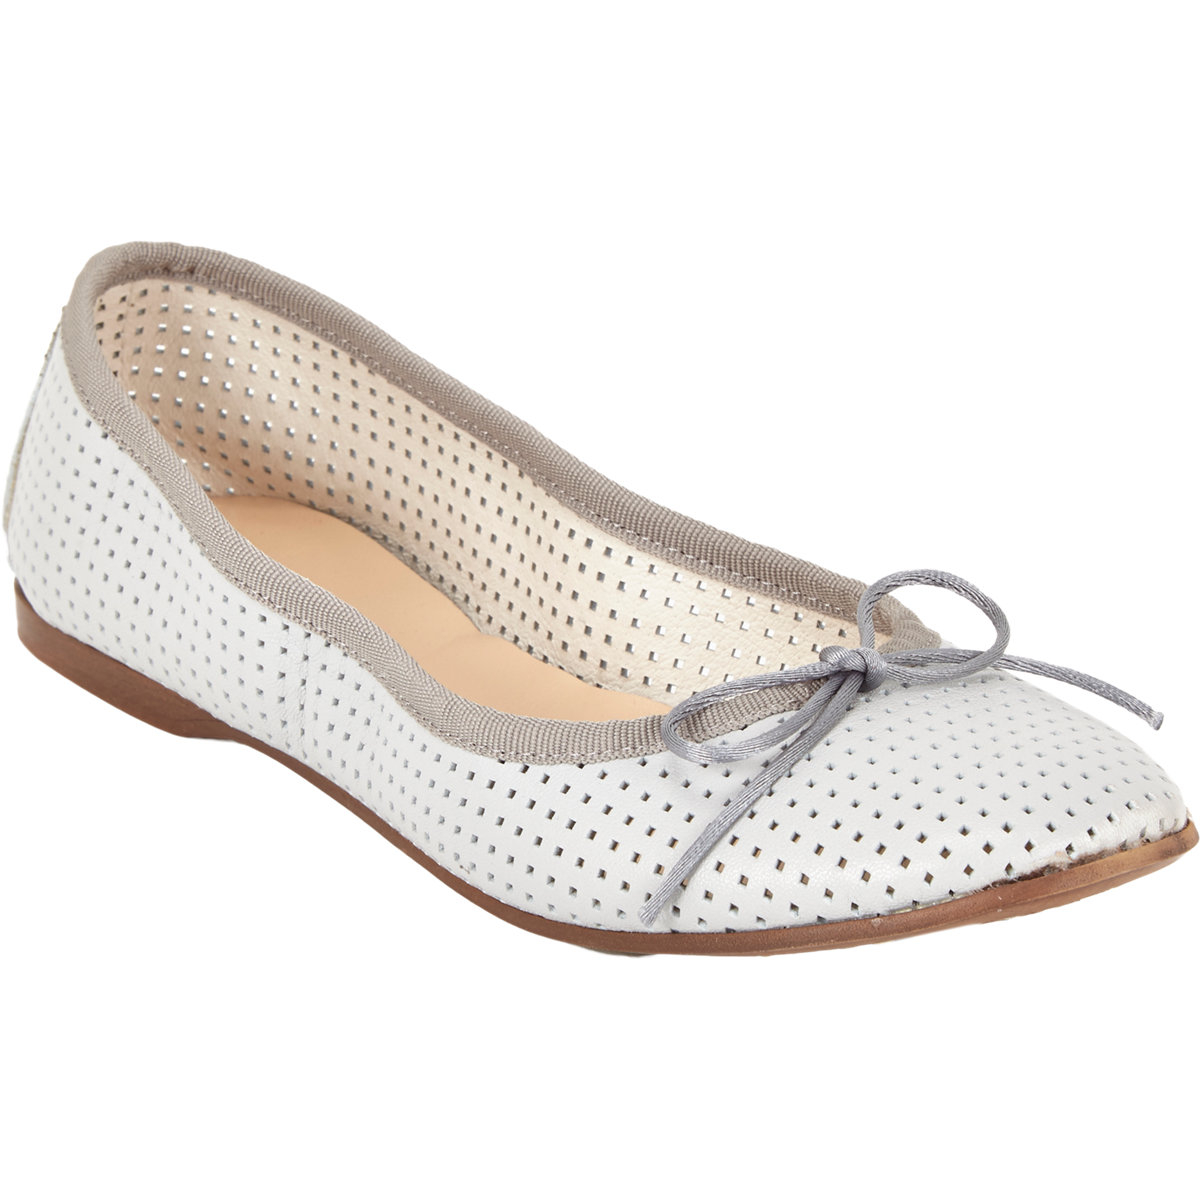 Lyst - Barneys New York Perforated Ballet Flats in Gray